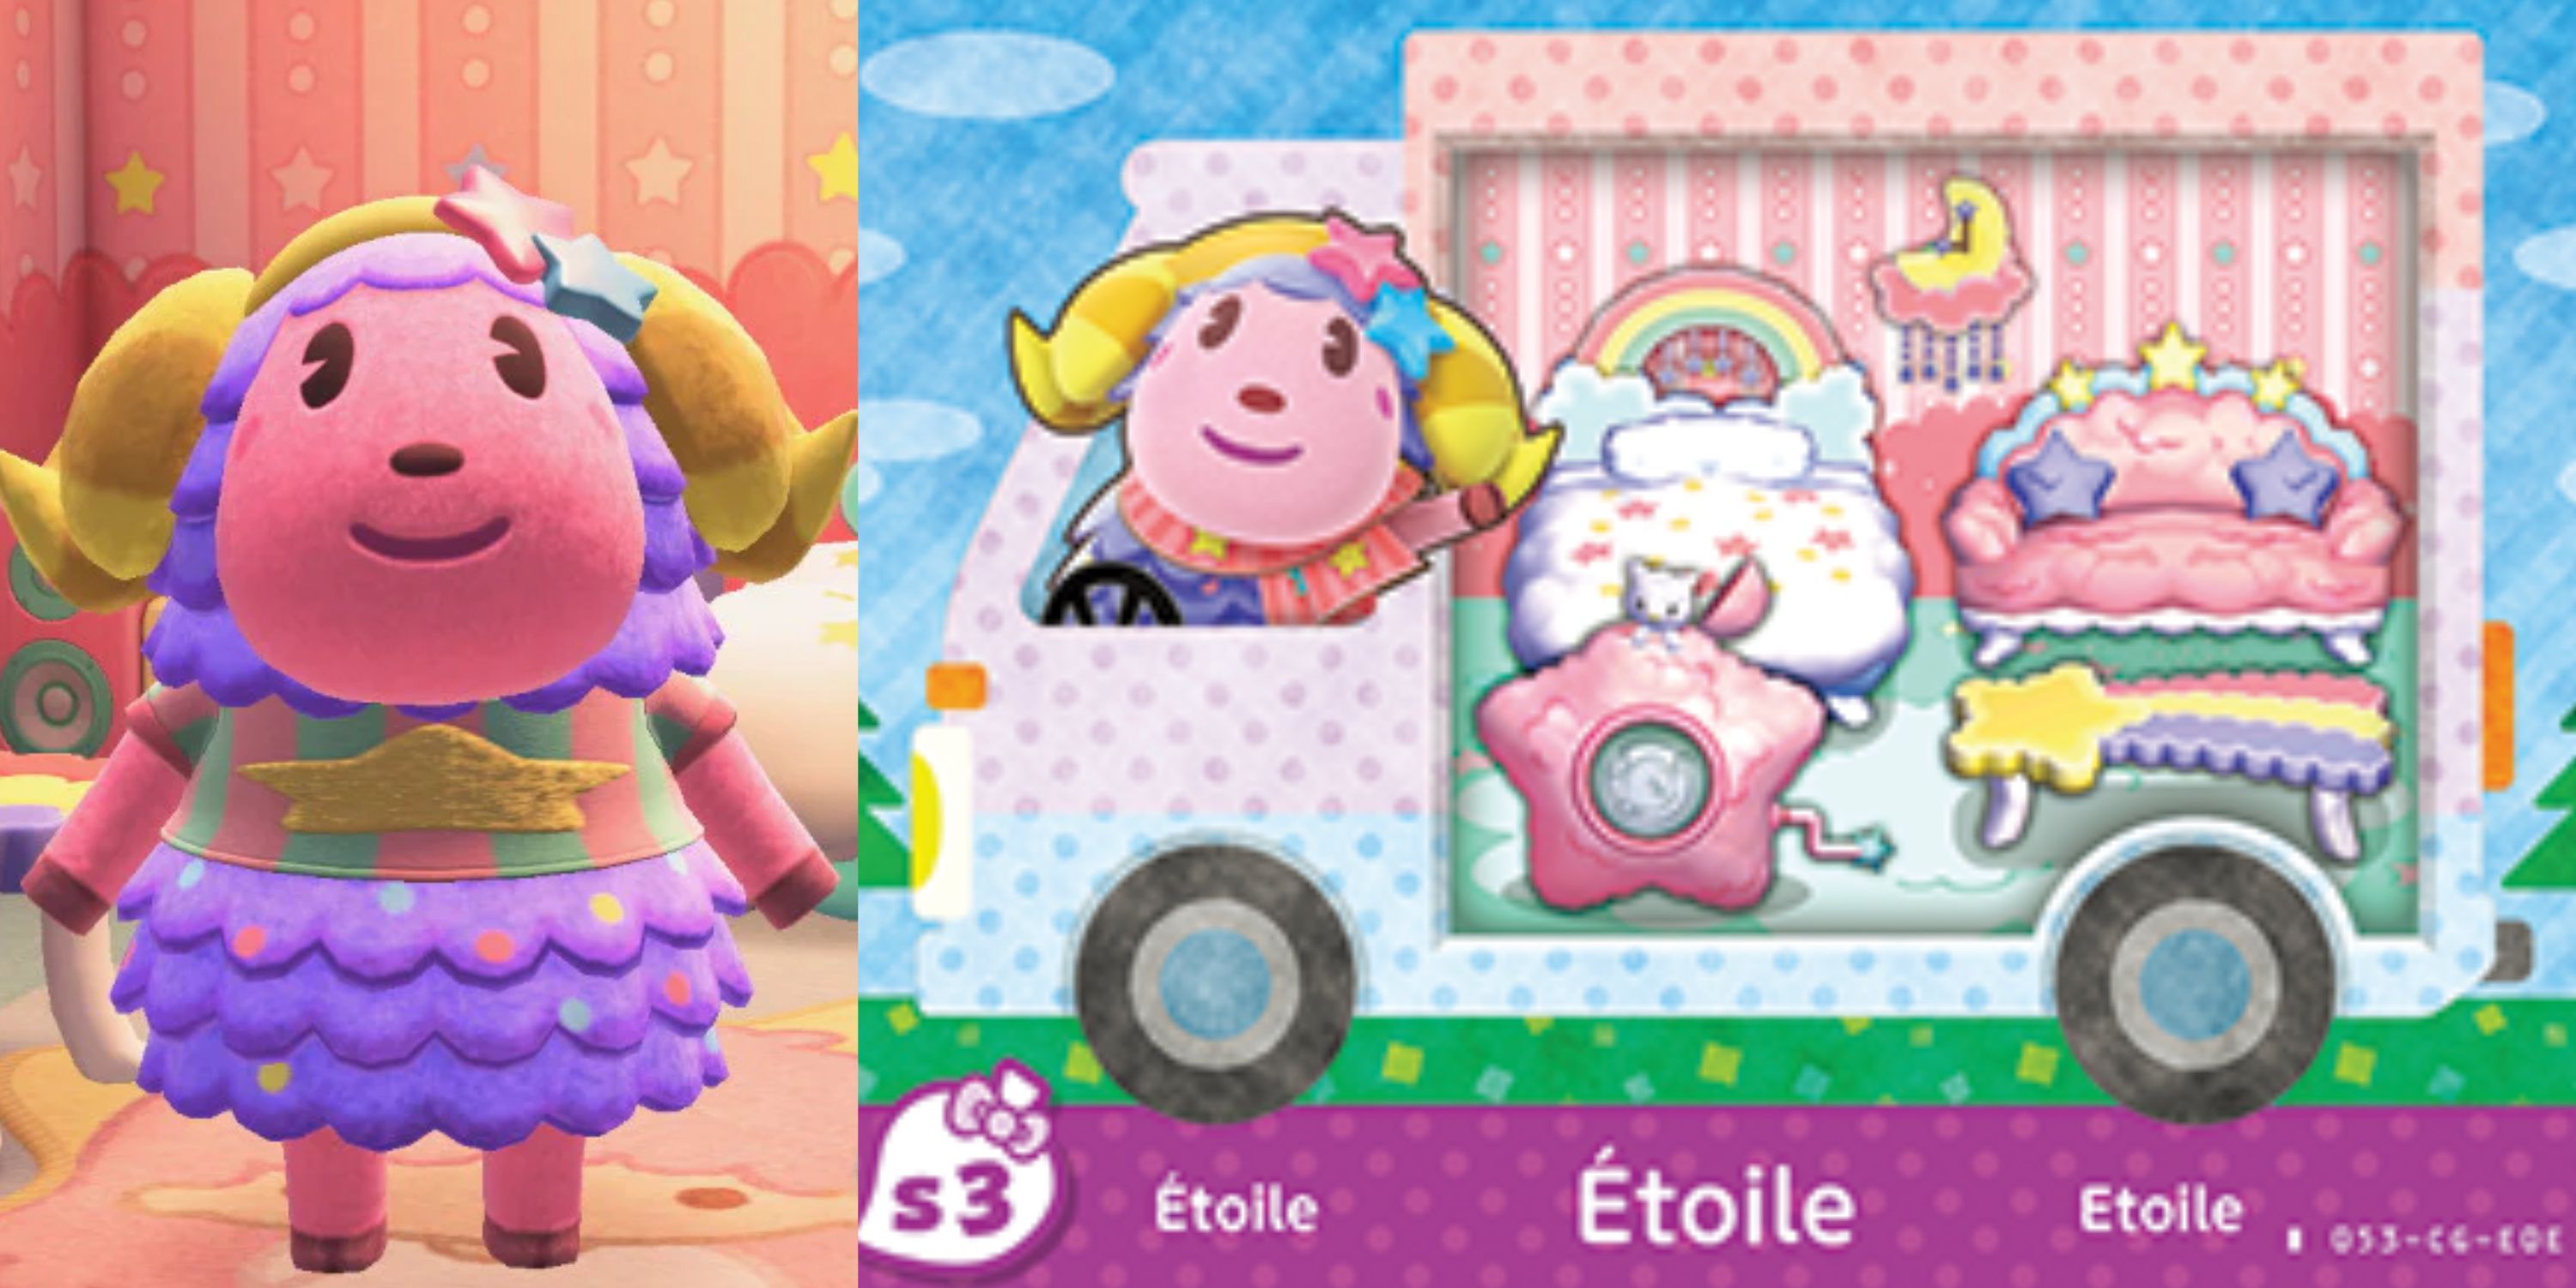 Etoile is a Little Twin Stars inspired Sheep villager